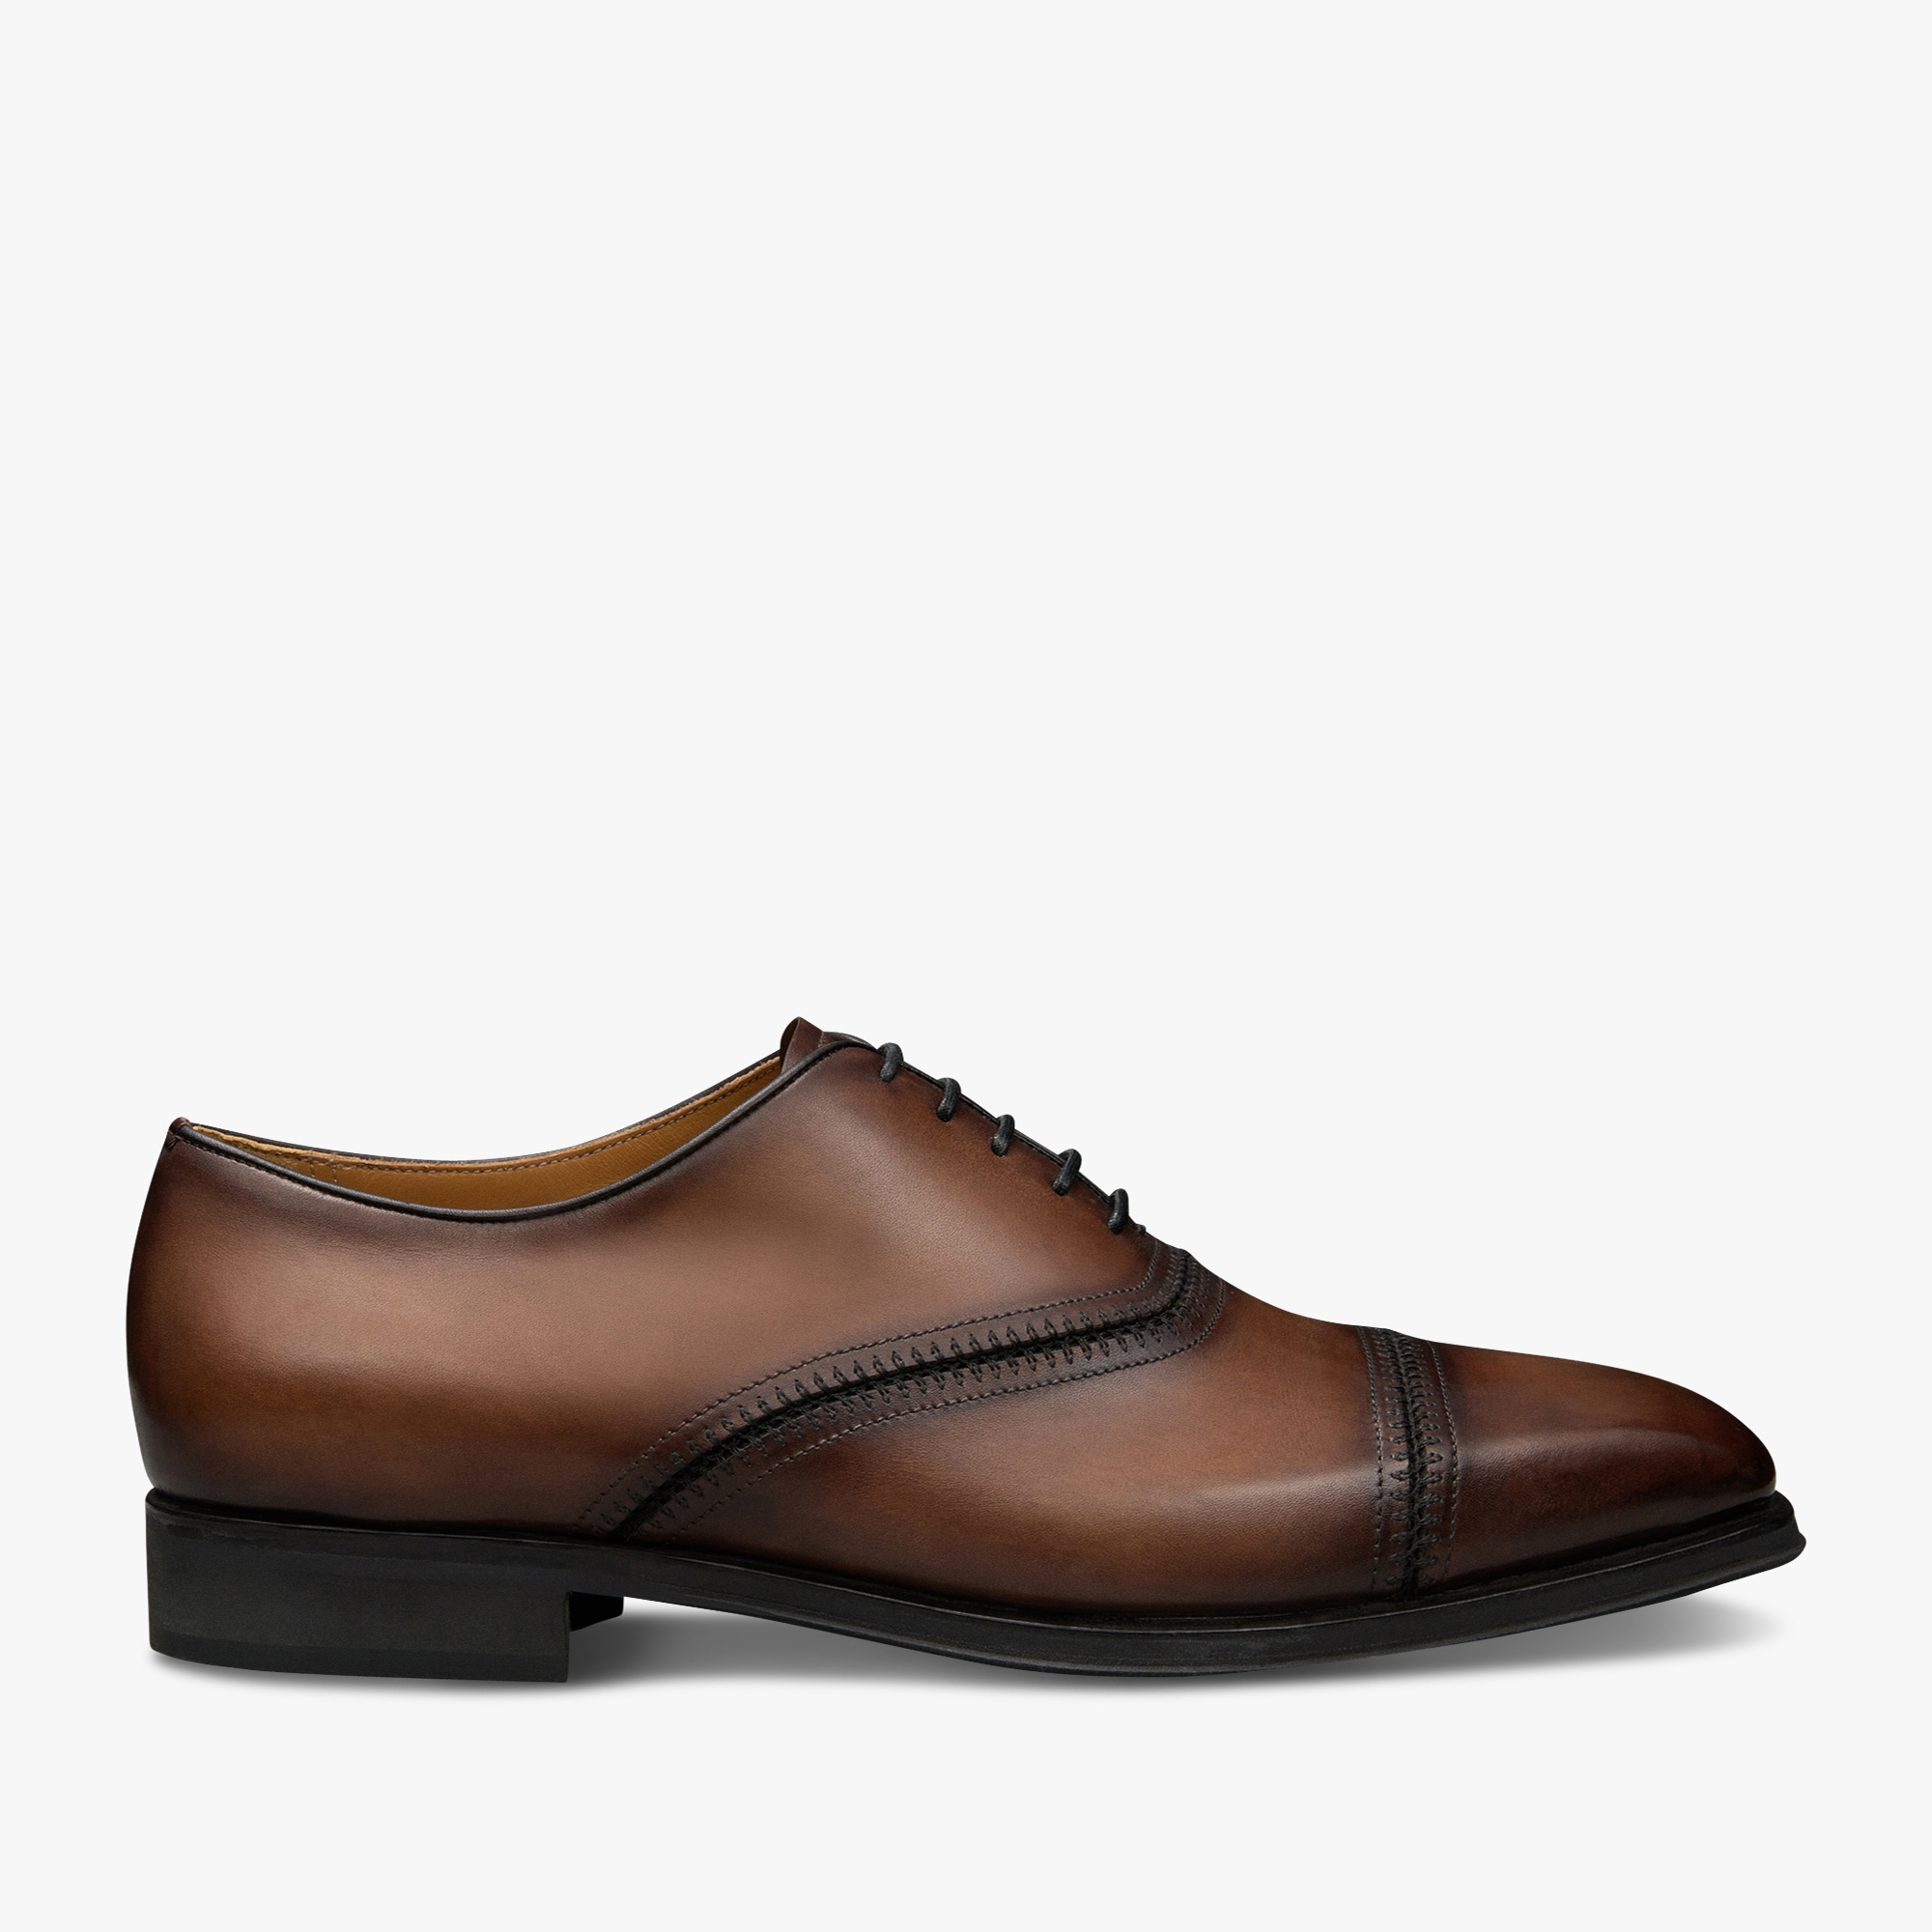 Infini Couture Leather Oxford, CACAO INTENSO, hi-res